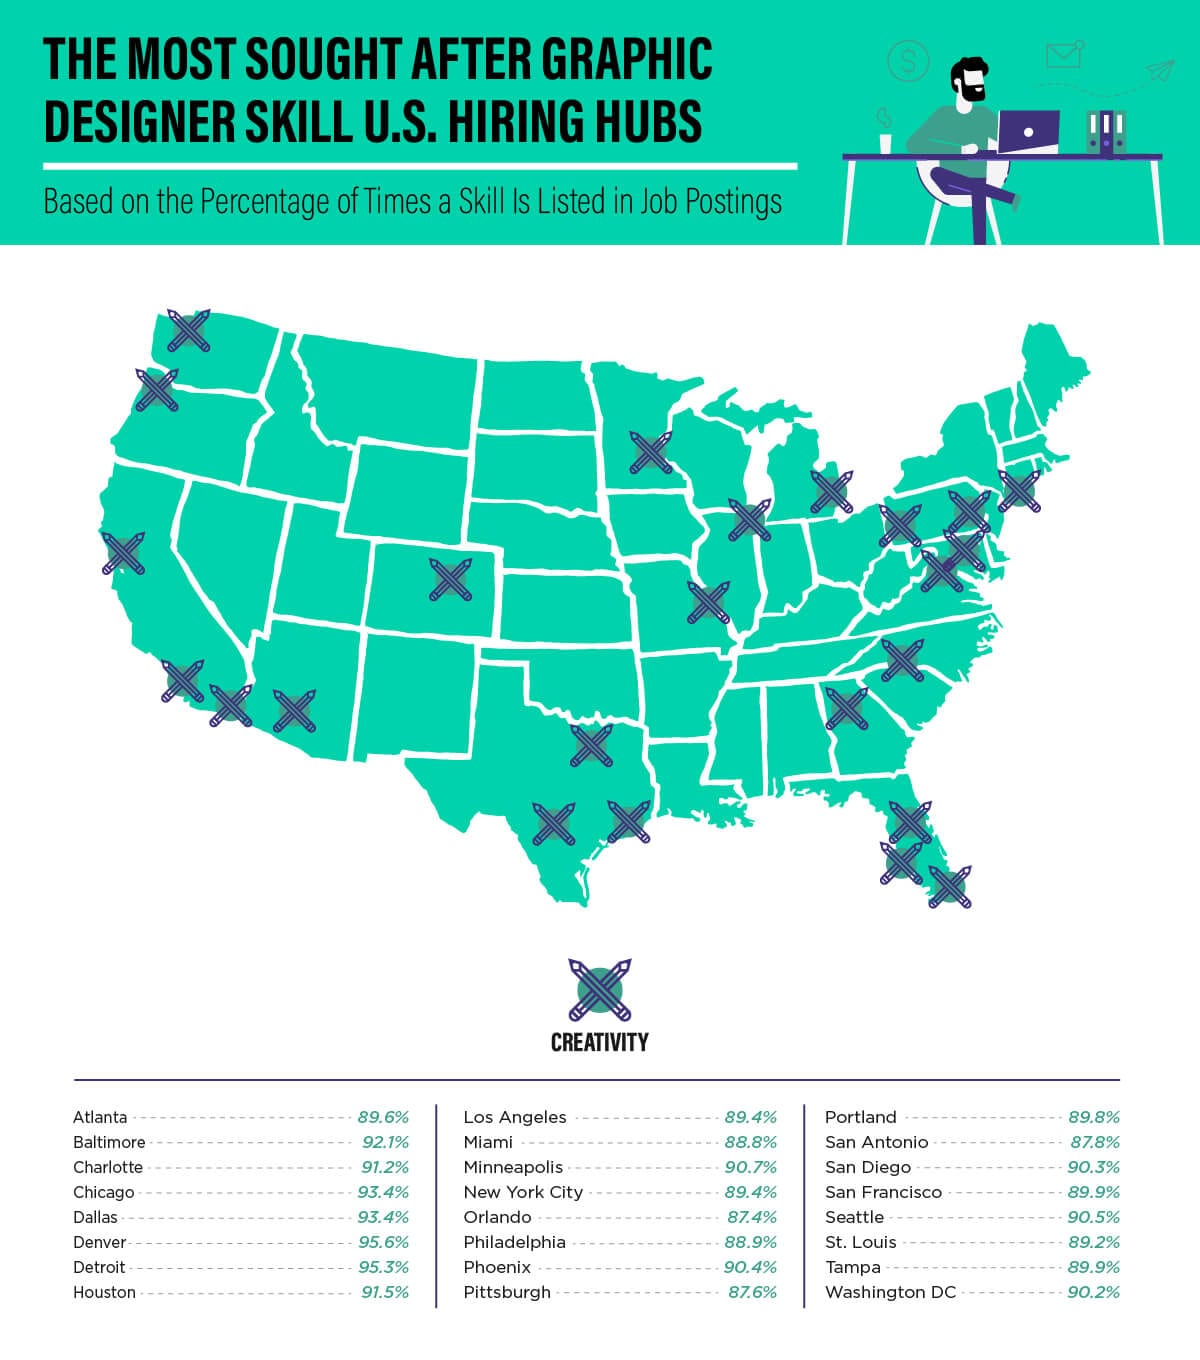 Graphic:most sought after graphic designer skill in US hiring hub cities 